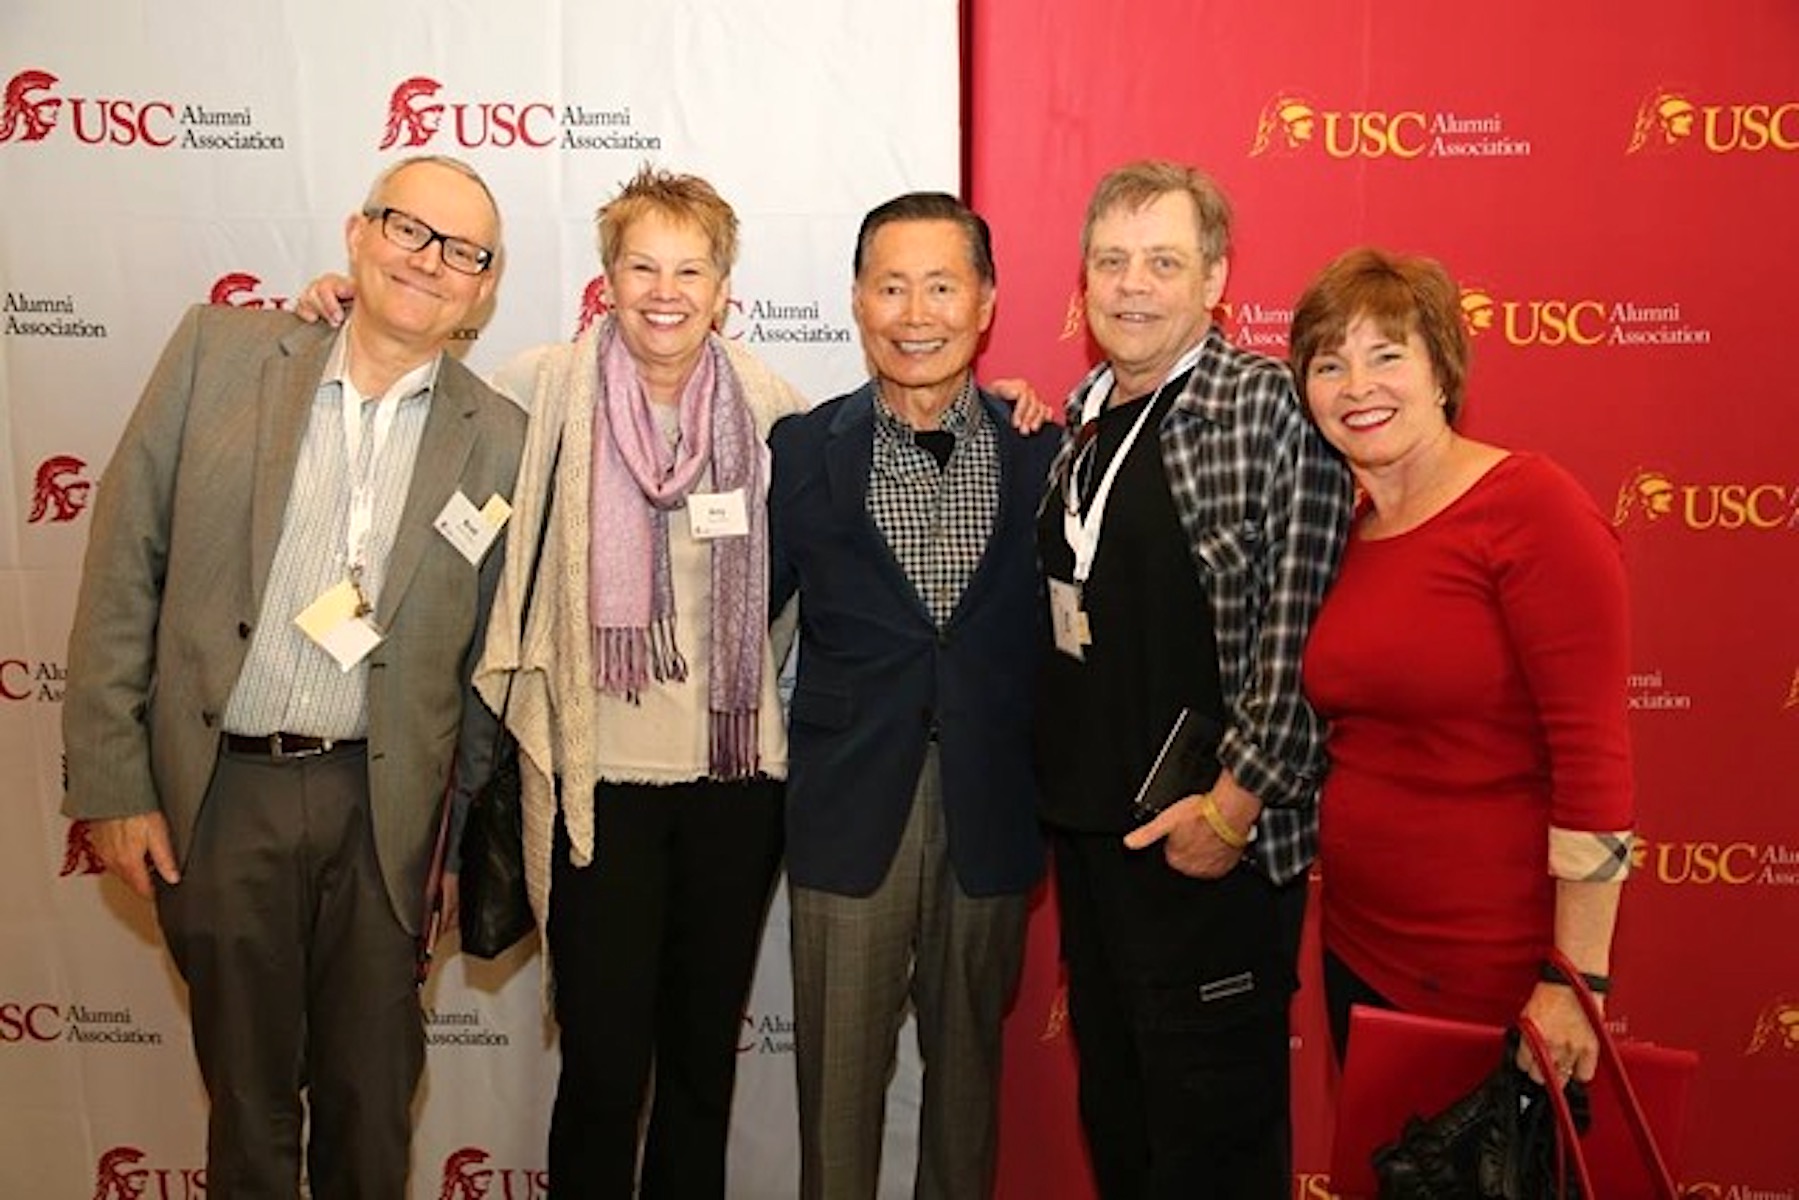 Amy Ross with her friends and festival supporters George Takei and Mark Hamill at the USC Lambda/Don Thompson Film Festival, 2014, Los Angeles, CA. Amy shares, “In 1992, I joined fellow USC LGBTQ alumni to establish the USC Lambda Alumni Association.  It was one of the first queer alumni groups at a major university. I was especially proud to establish the USC Lambda/Don Thompson Film Festival which features the films of USC’s School of Cinematic Arts student group “Queer Cut.” Over the years, we have raised a significant amount of money for scholarships for LGBTQ and ally students.”